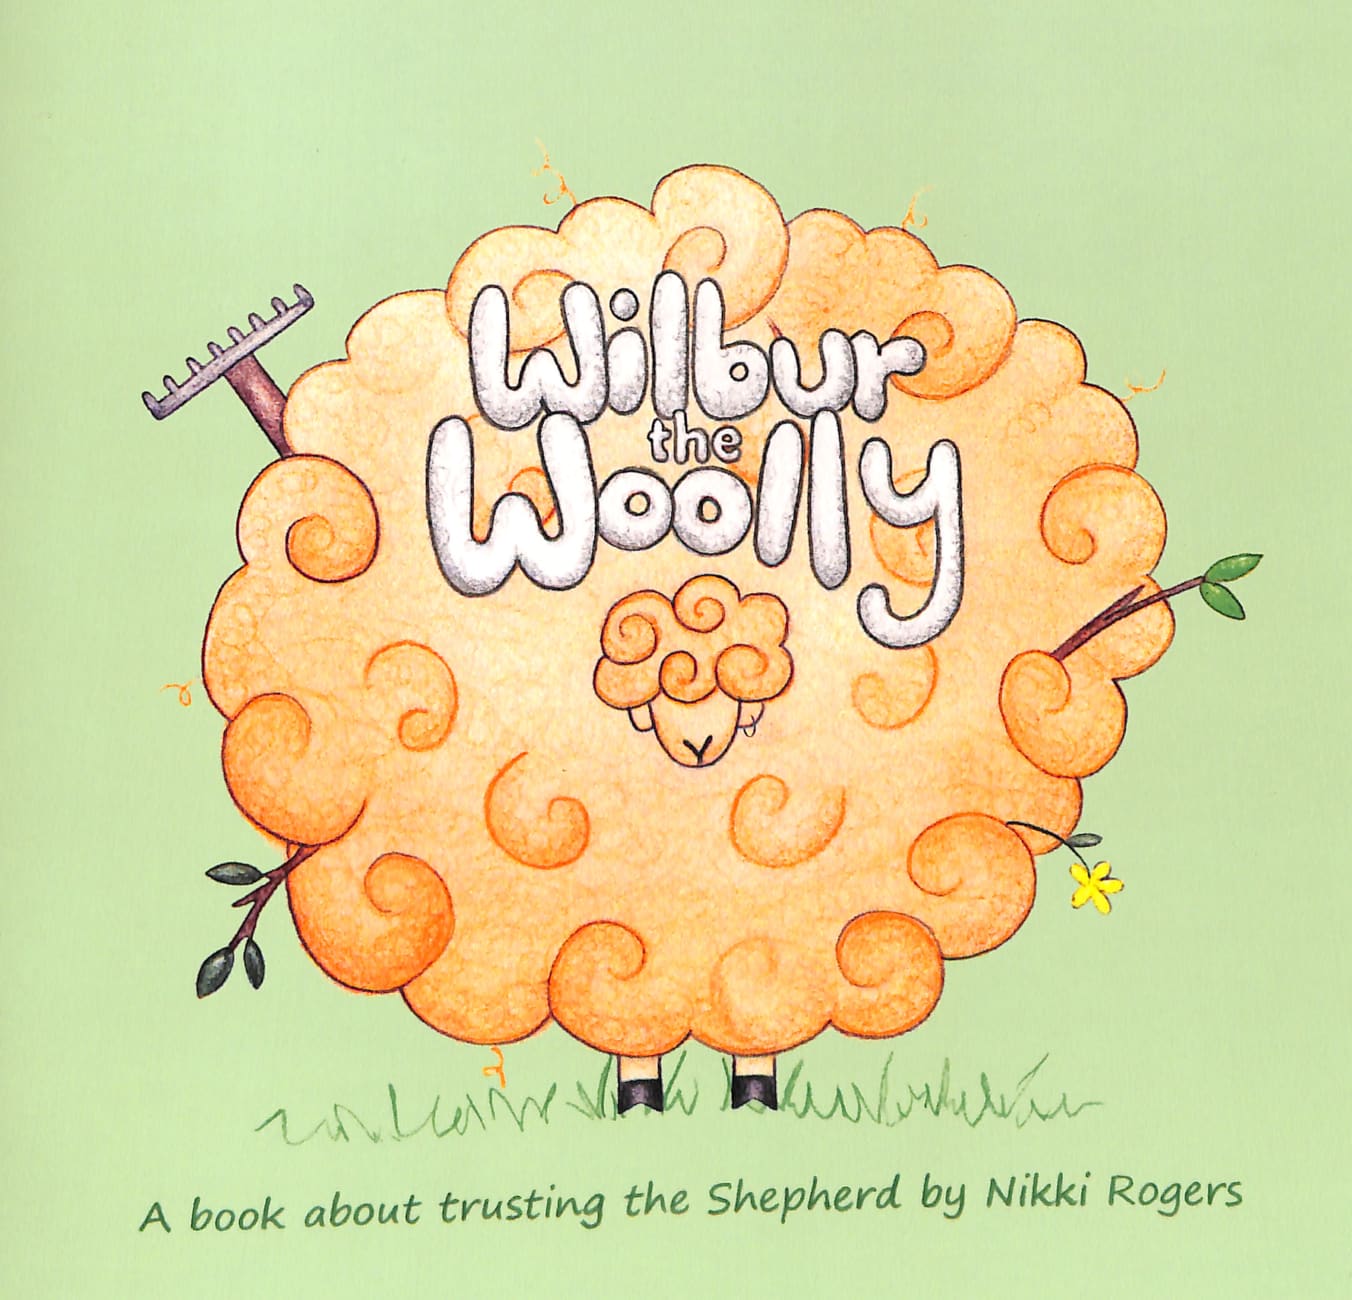 Wilbur the Woolly: A Book About Trusting the Shepherd (#06 in Created To Be Series) Paperback